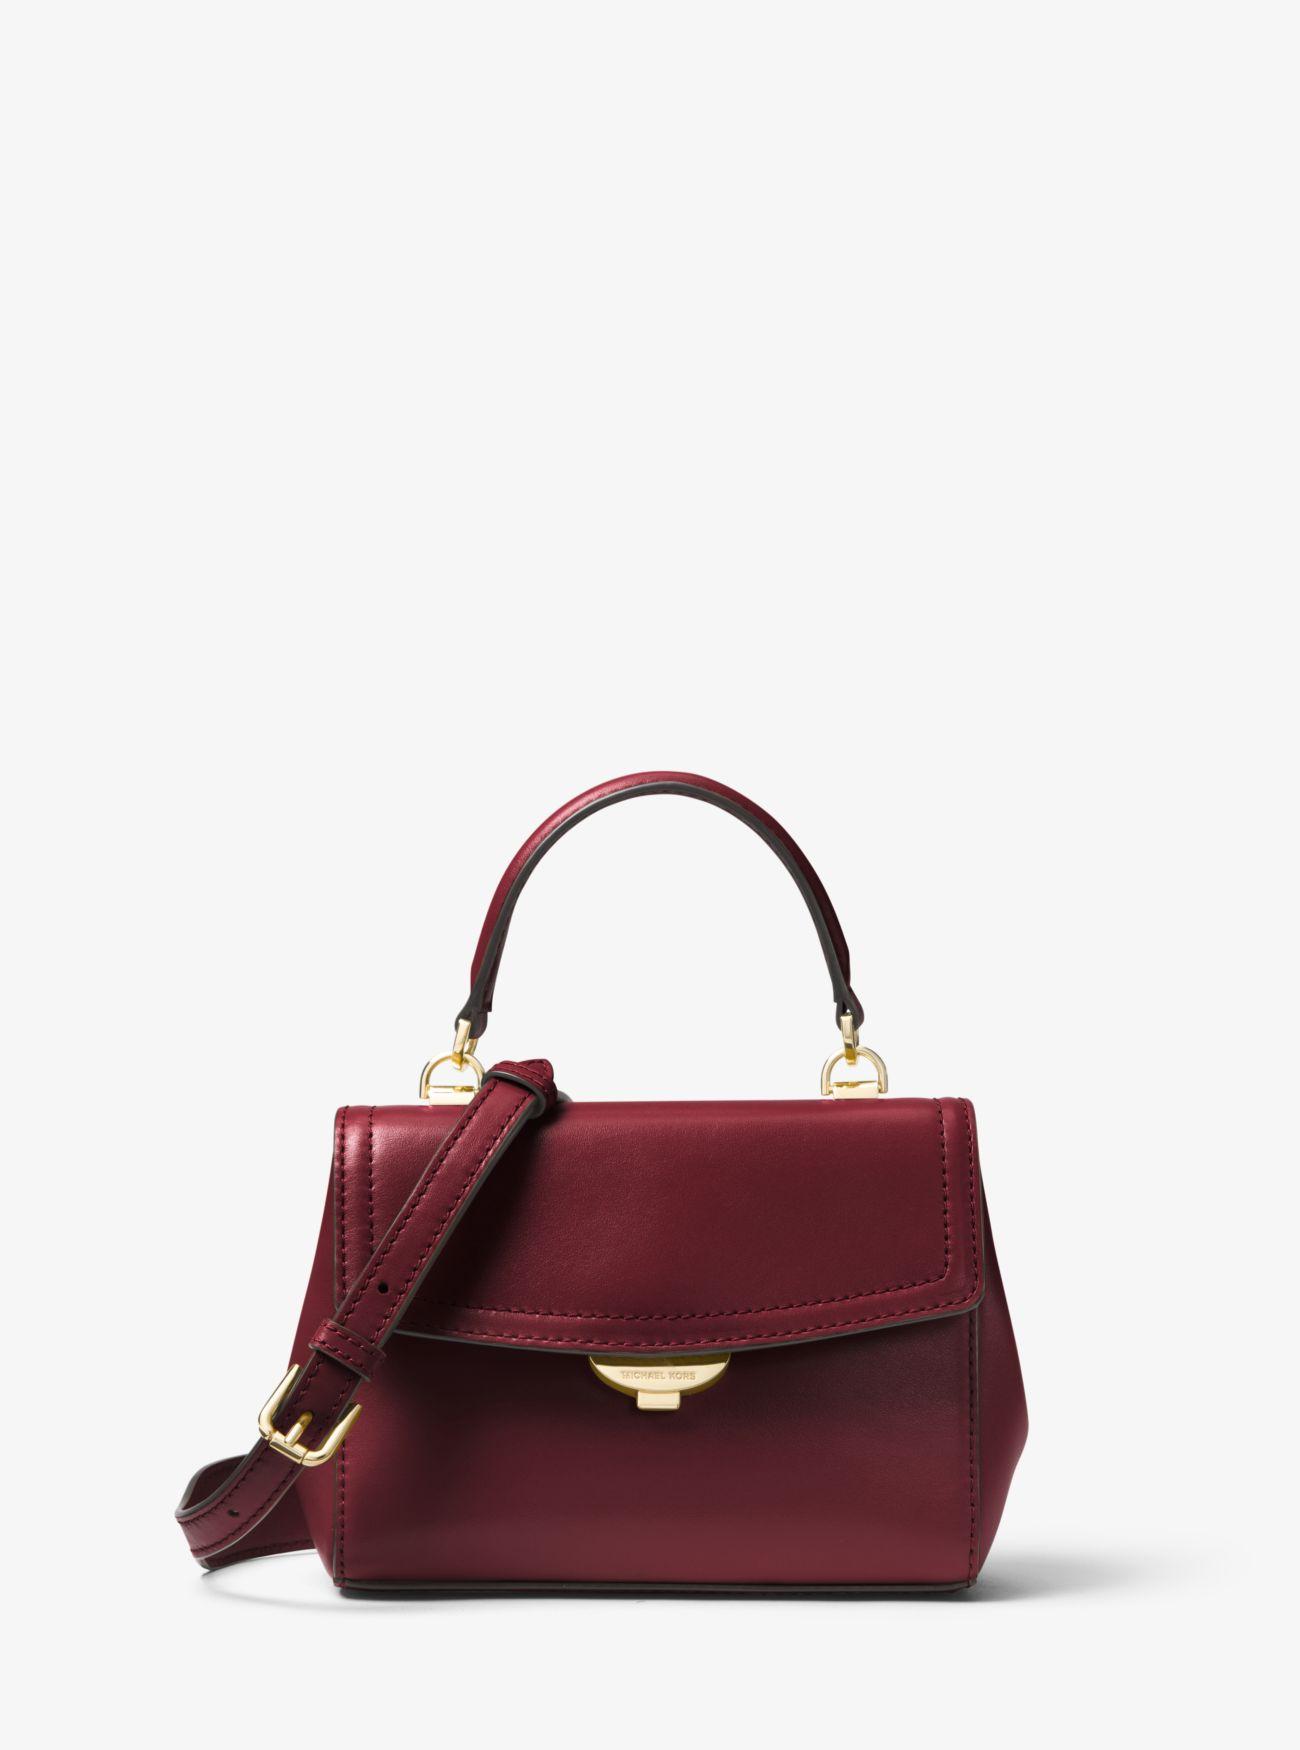 Michael Kors Ava Extra-small Leather Crossbody Bag in Oxblood (Red) - Lyst